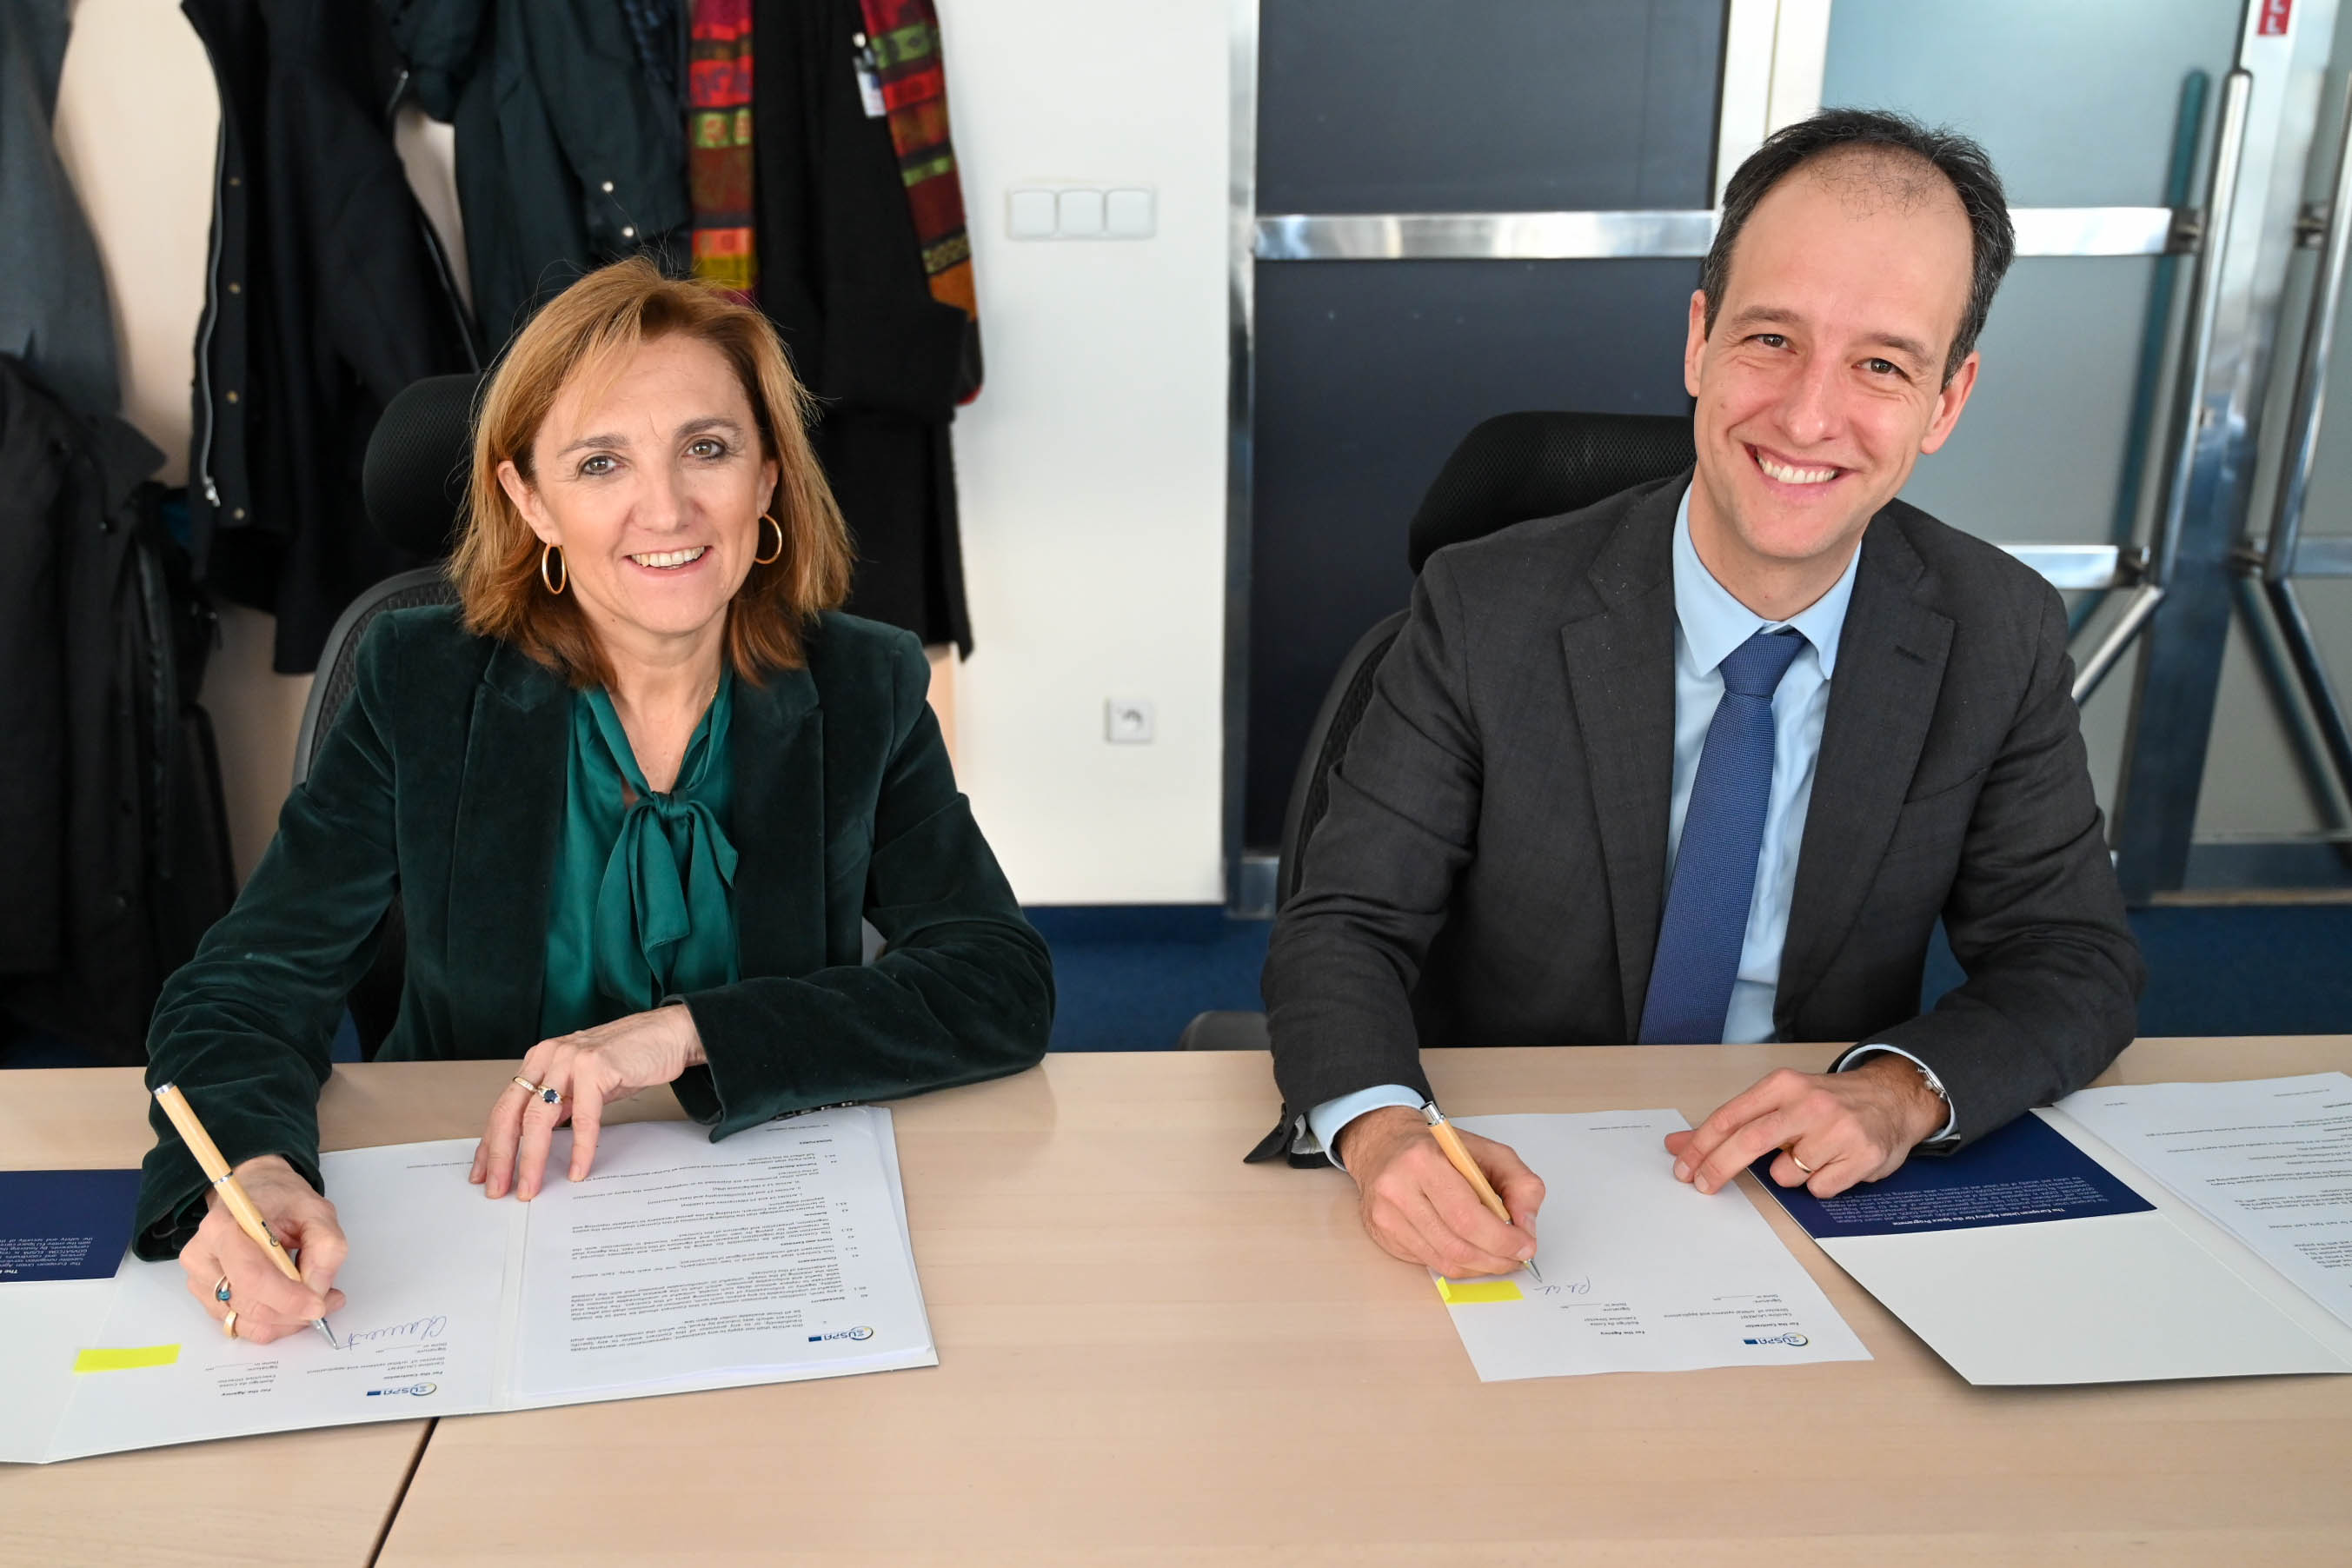 CNES and EUSPA sign framework contract entrusting the responsibility of SAR-Galileo services.